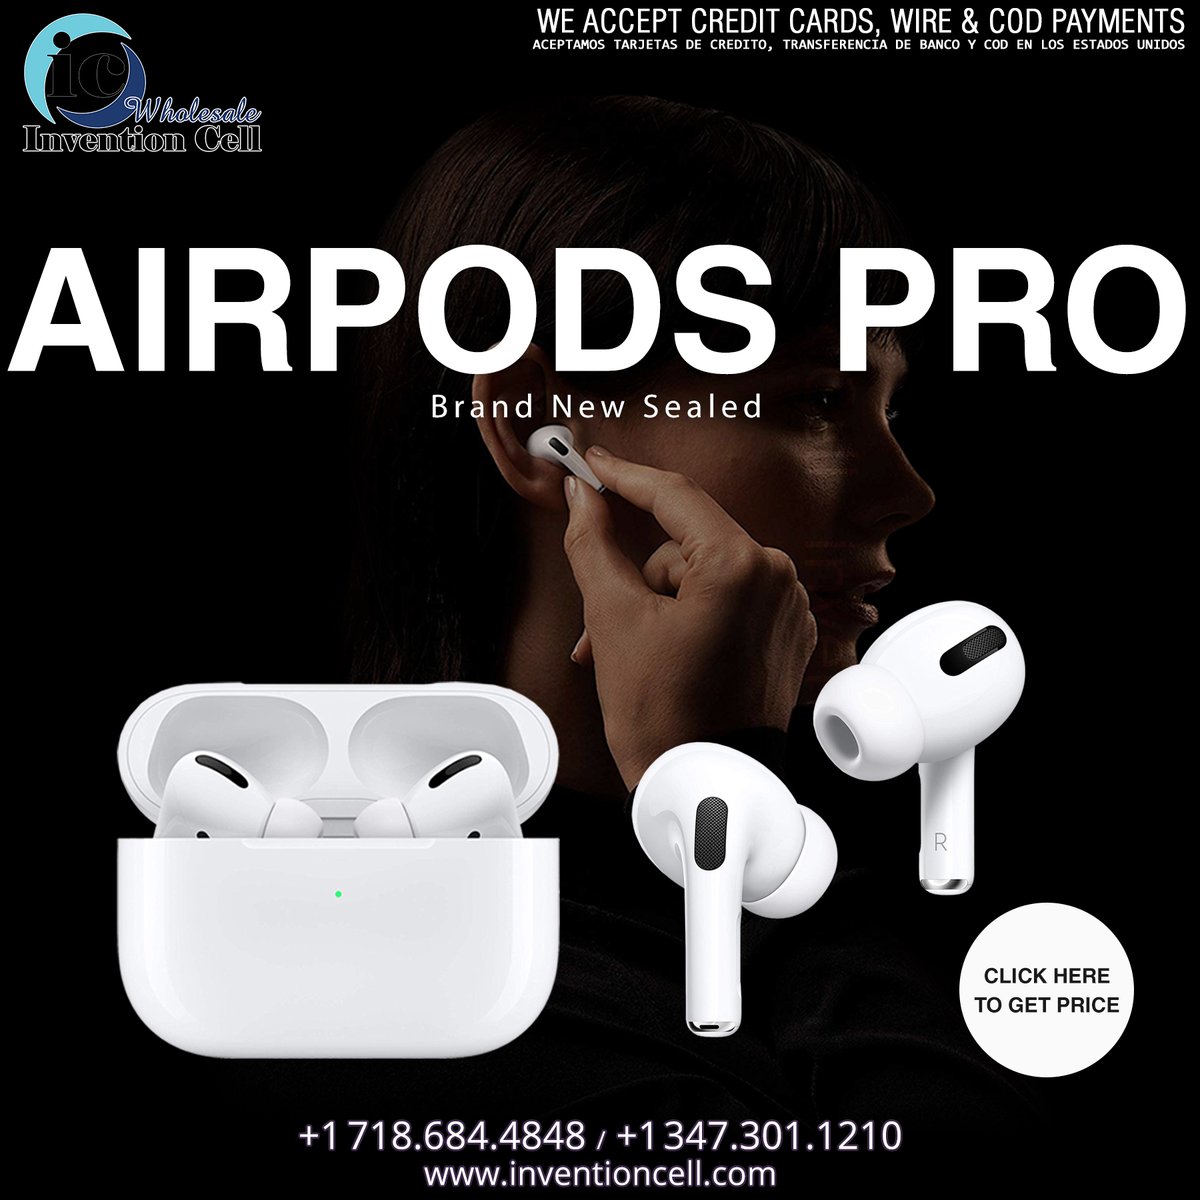 Buy Now New Airpods Pro by just clicking the link: inventioncell.com/apple-airpods-…
Call Us: +1-718-684-4848 for more #Airpods & Other #Earphones.
#headphones #Newyork #NYC #Headsets #buds #earbuds #headphone #Accessories #bluetoothheadset #Bronx #Bronxny #NY #apple #airpodspro